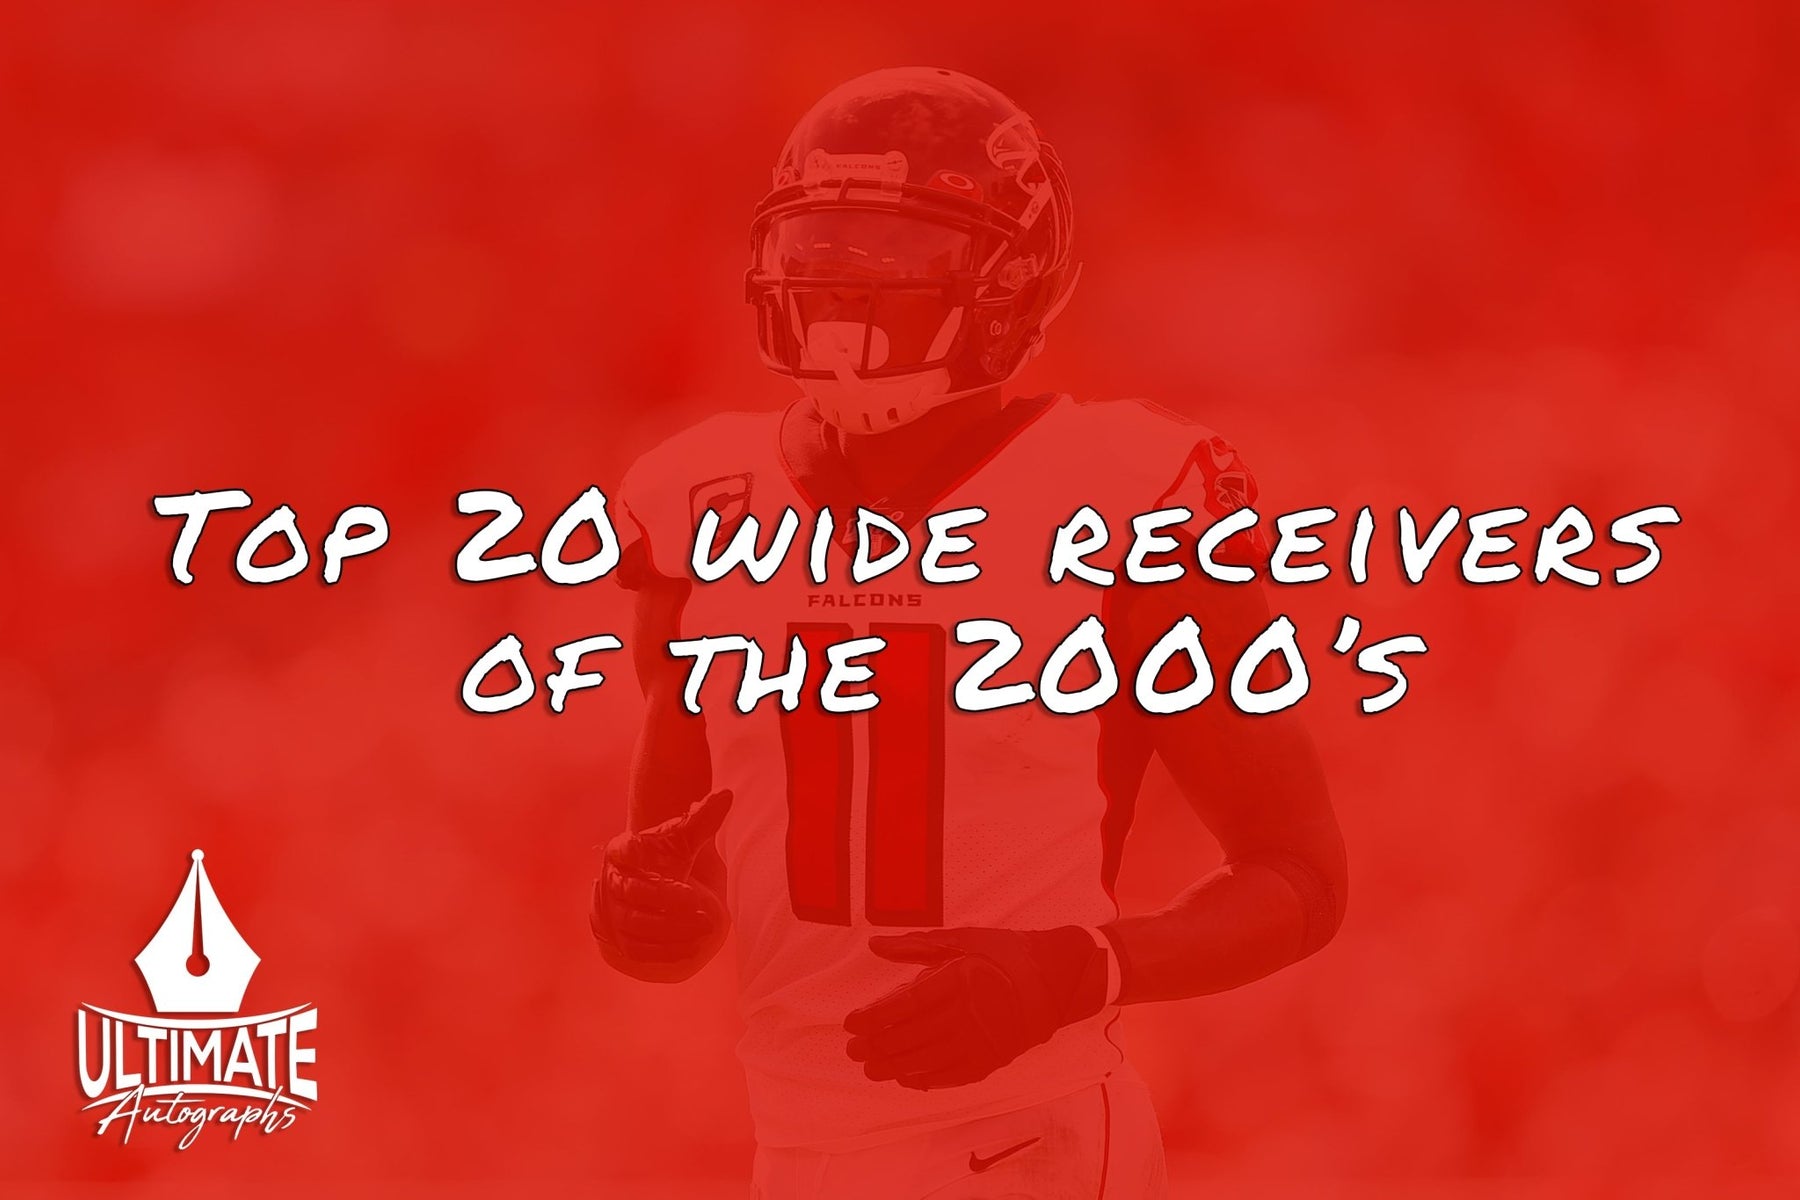 Top 20 Wide Receivers of the 2000s: 10 - 1